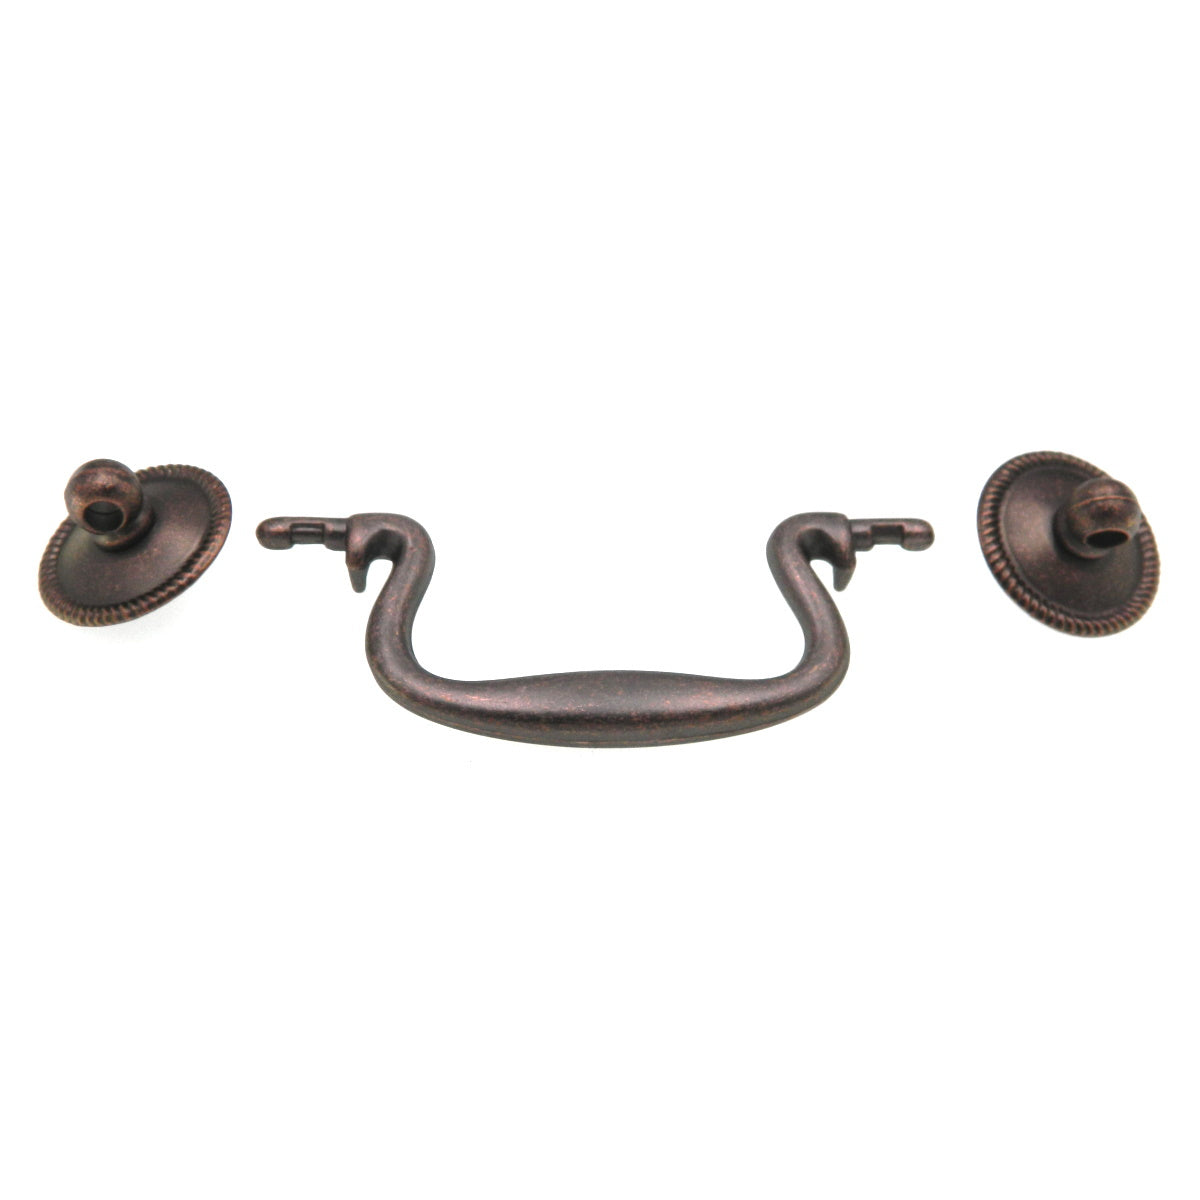 Get Belwith P3477-ST 3-1/2 Inch Stone Cabinet Bail Pull